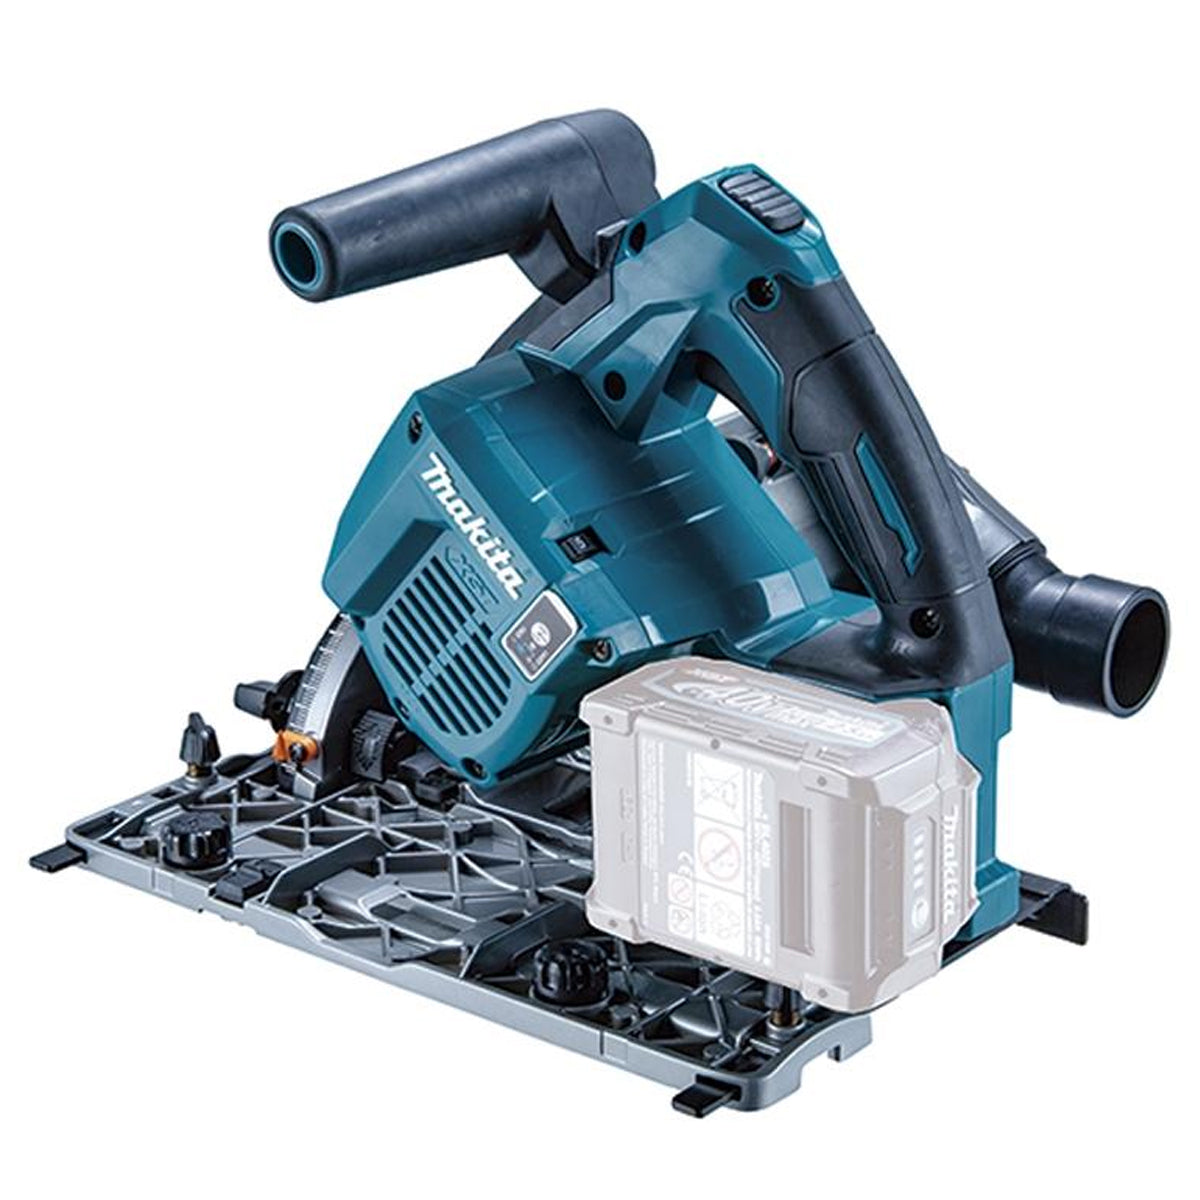 Makita SP001GZ03 40V Brushless Plunge Saw with 2 x Guide Rail, Clamp, Bag & Case